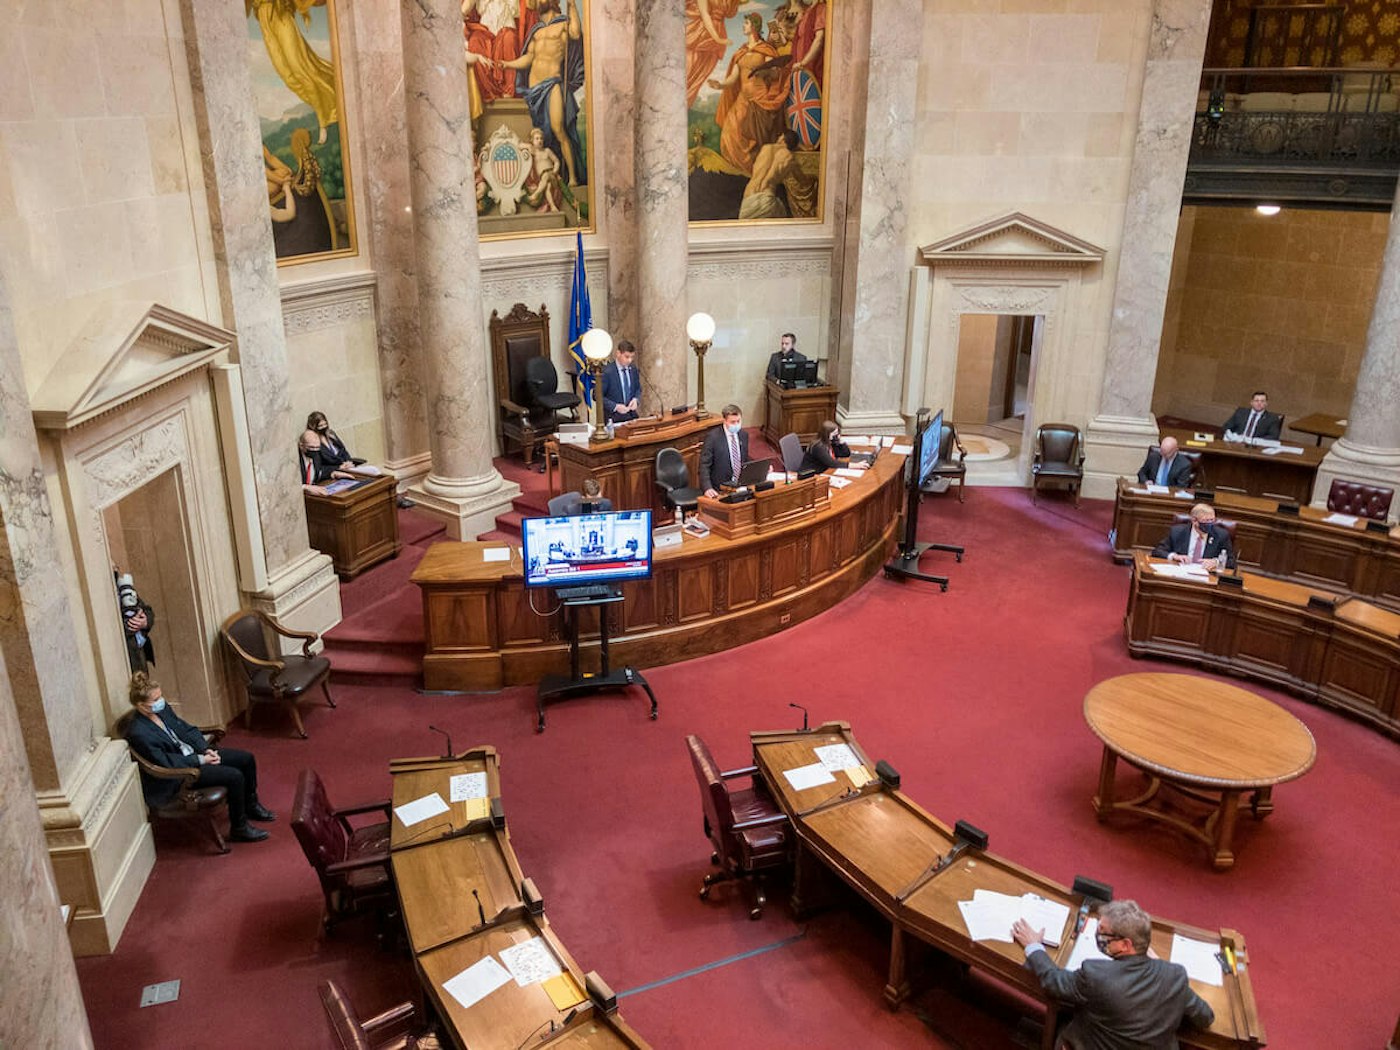 State Senate chambers at the Wisconsin state Capitol in Madison. (Photo by Christina Lieffring)